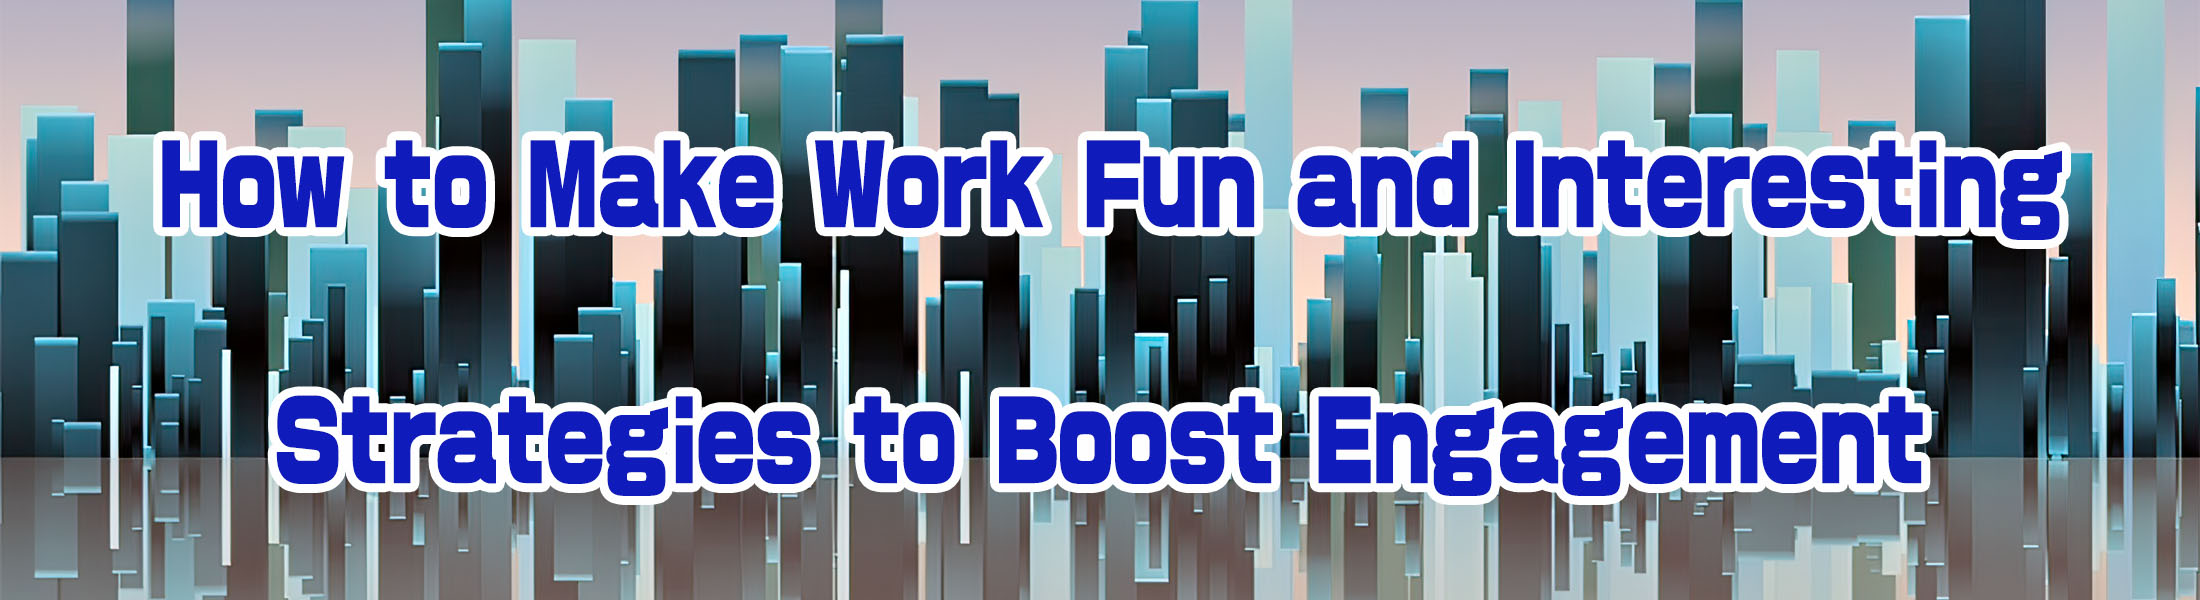 How to Make Work Fun and Interesting: Strategies to Boost Engagement